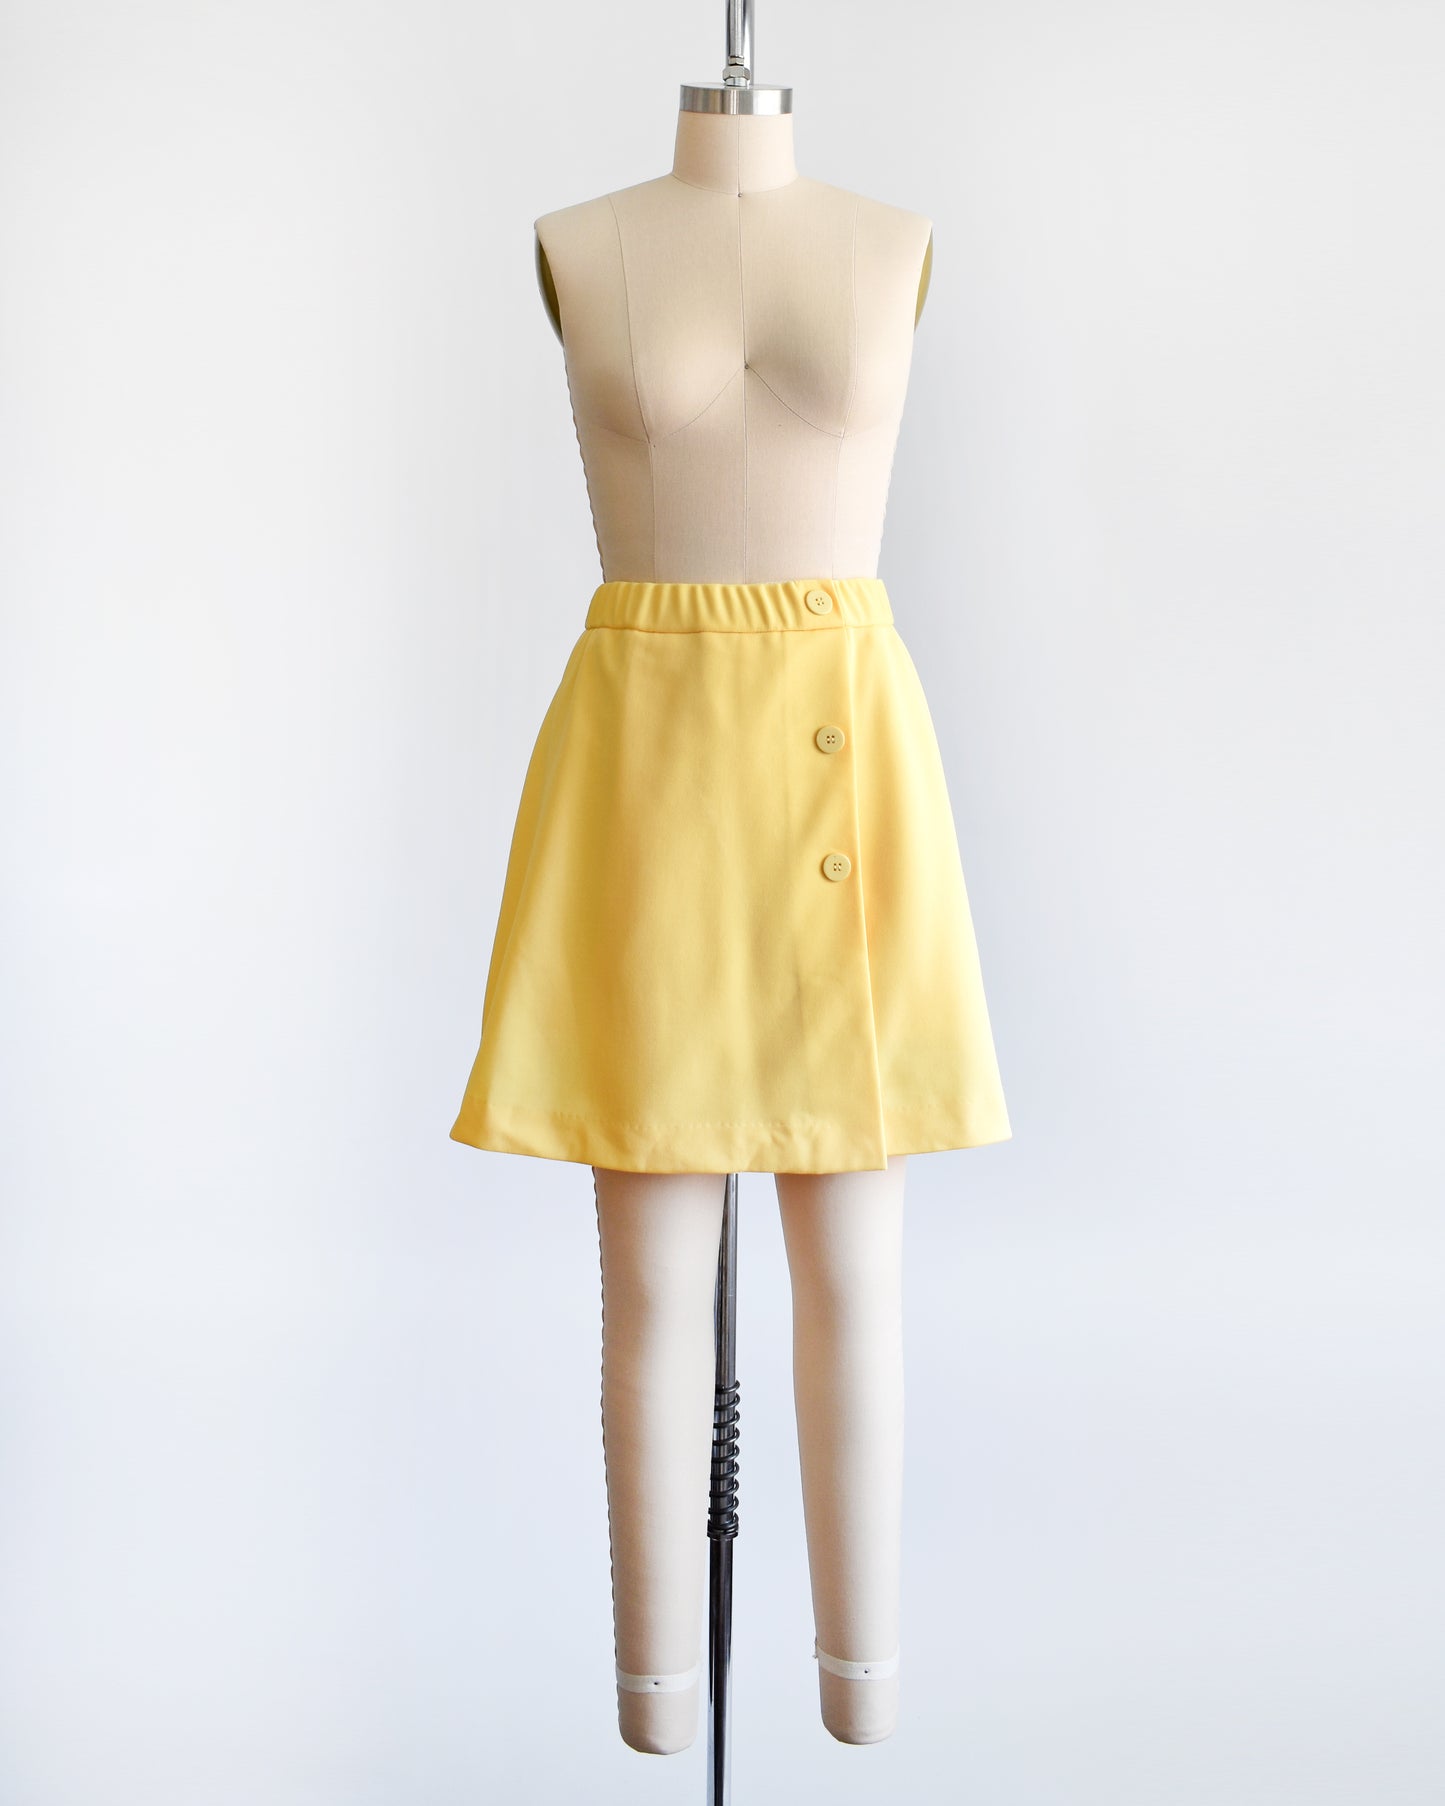 a vintage 1970s skort with three decorative buttons along the left side